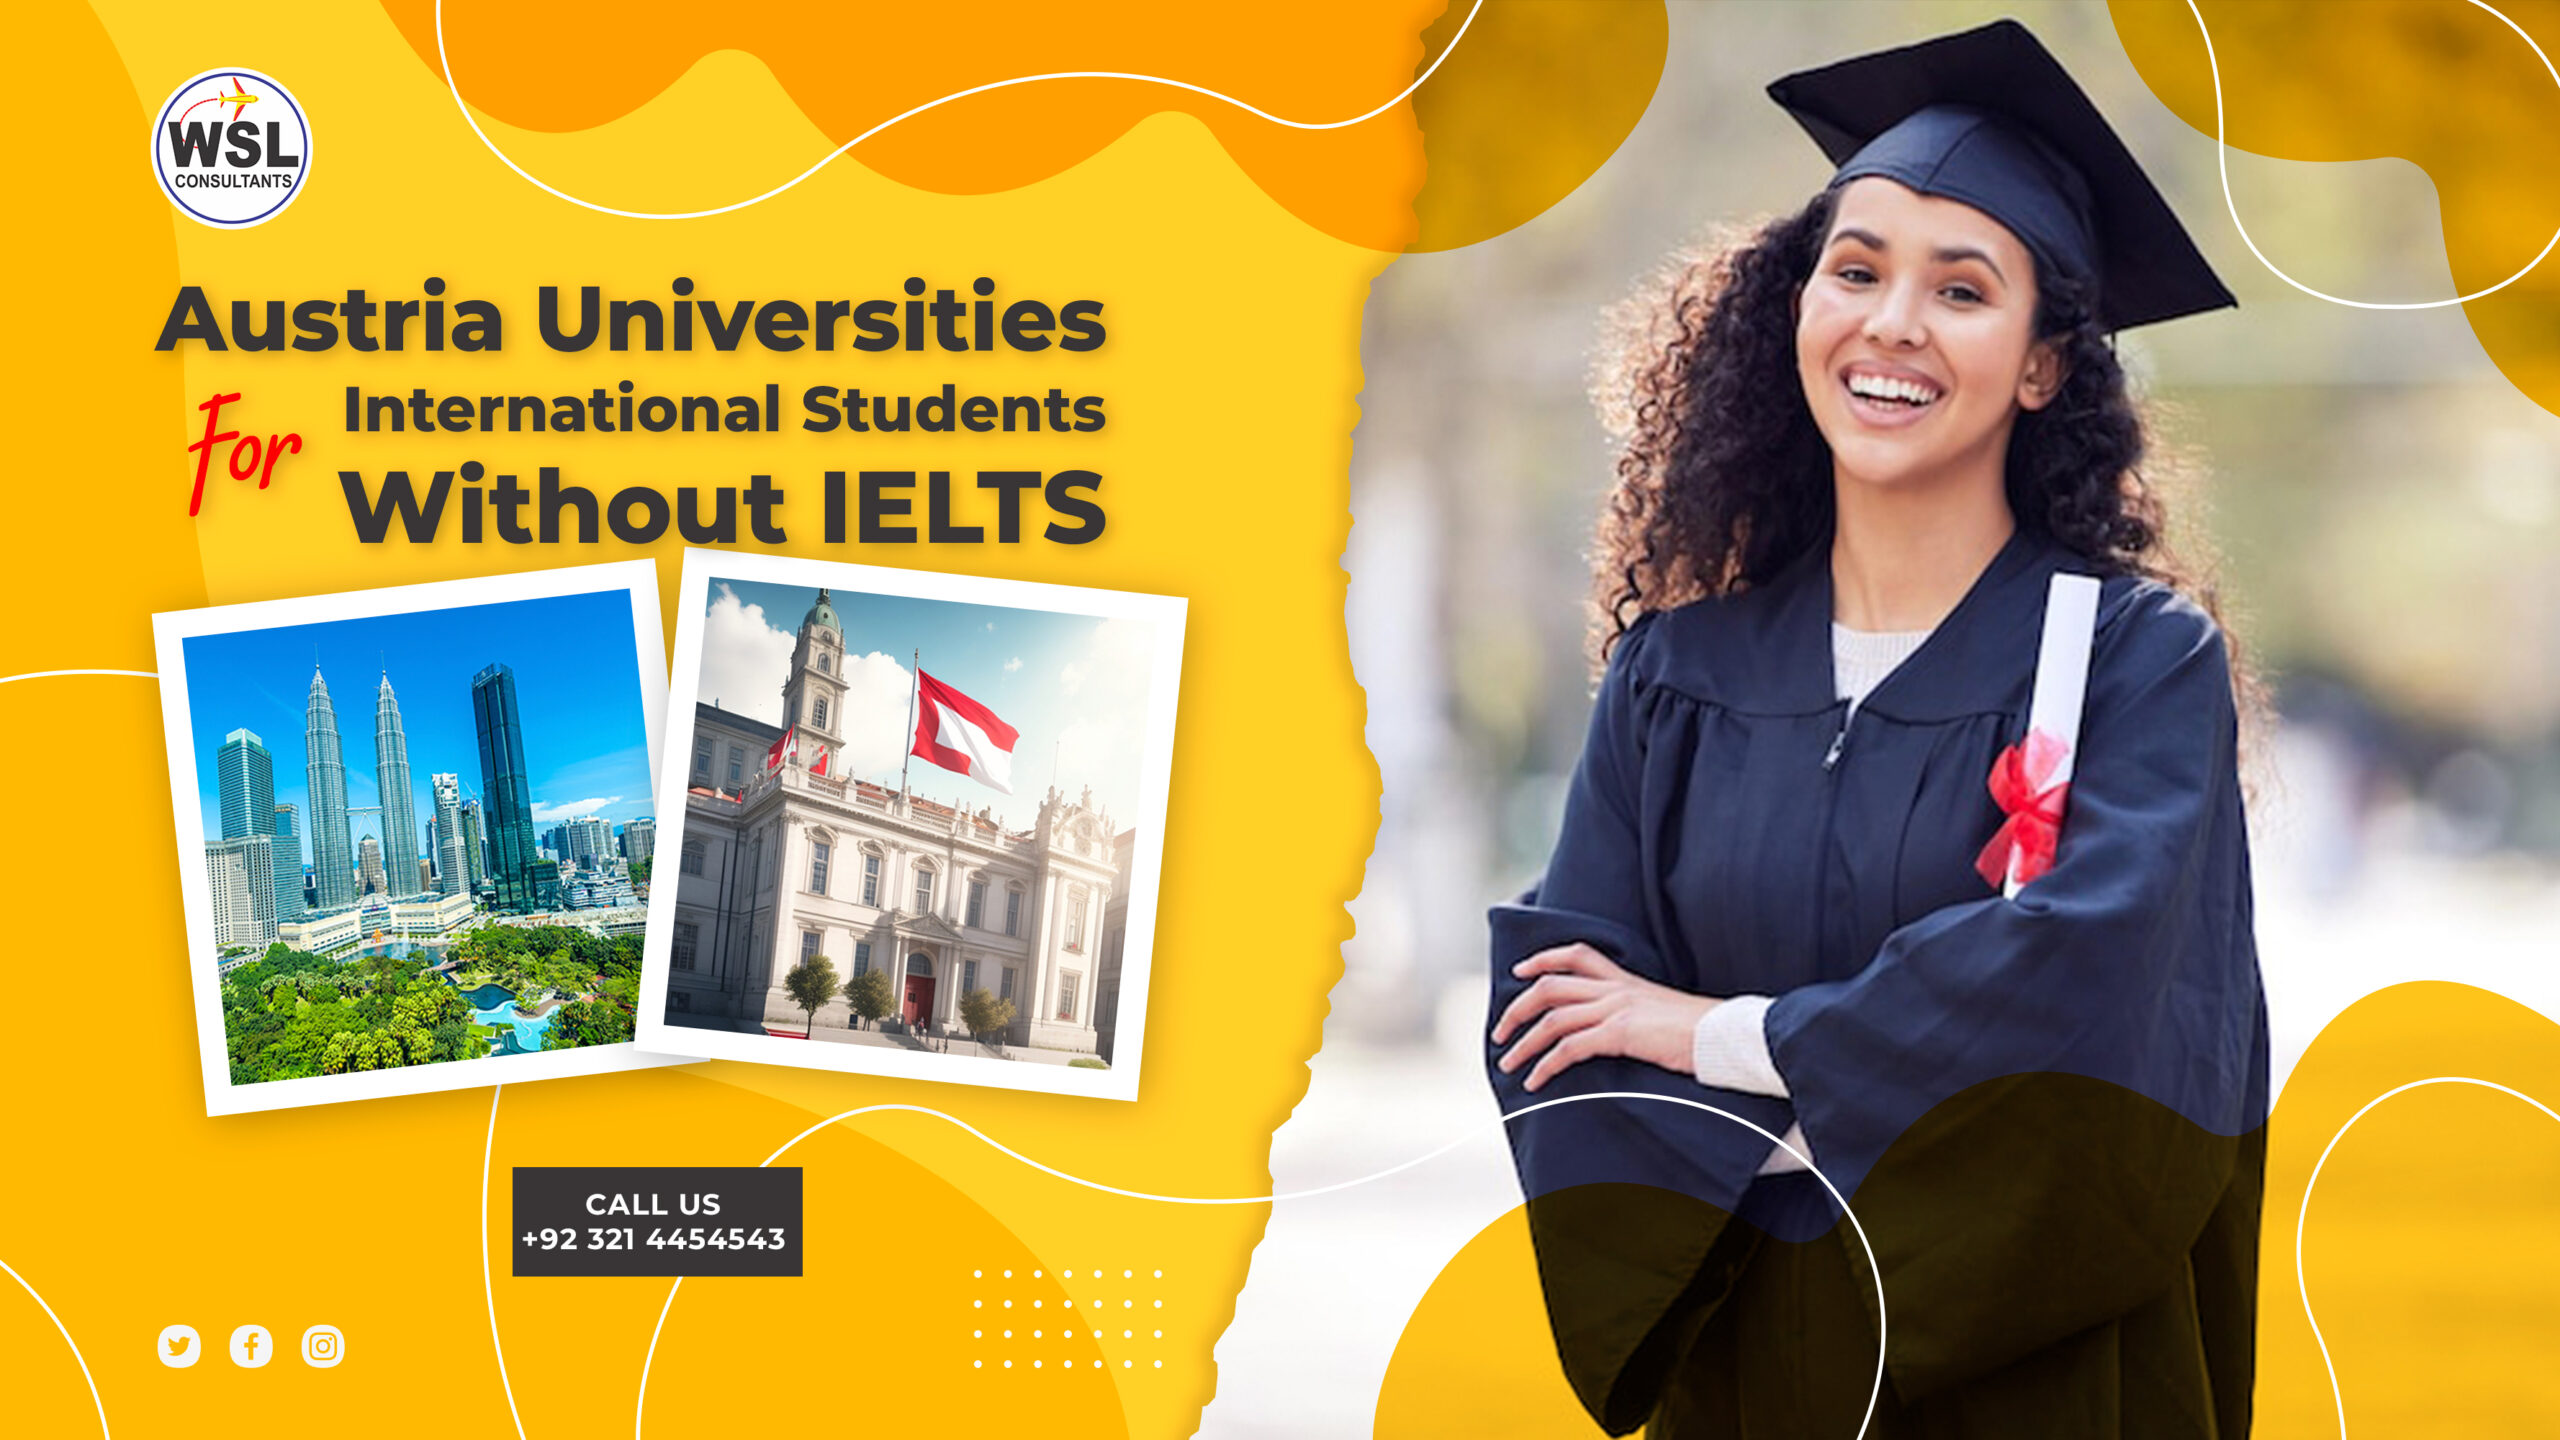 Austria Universities for International Students Without IELTS